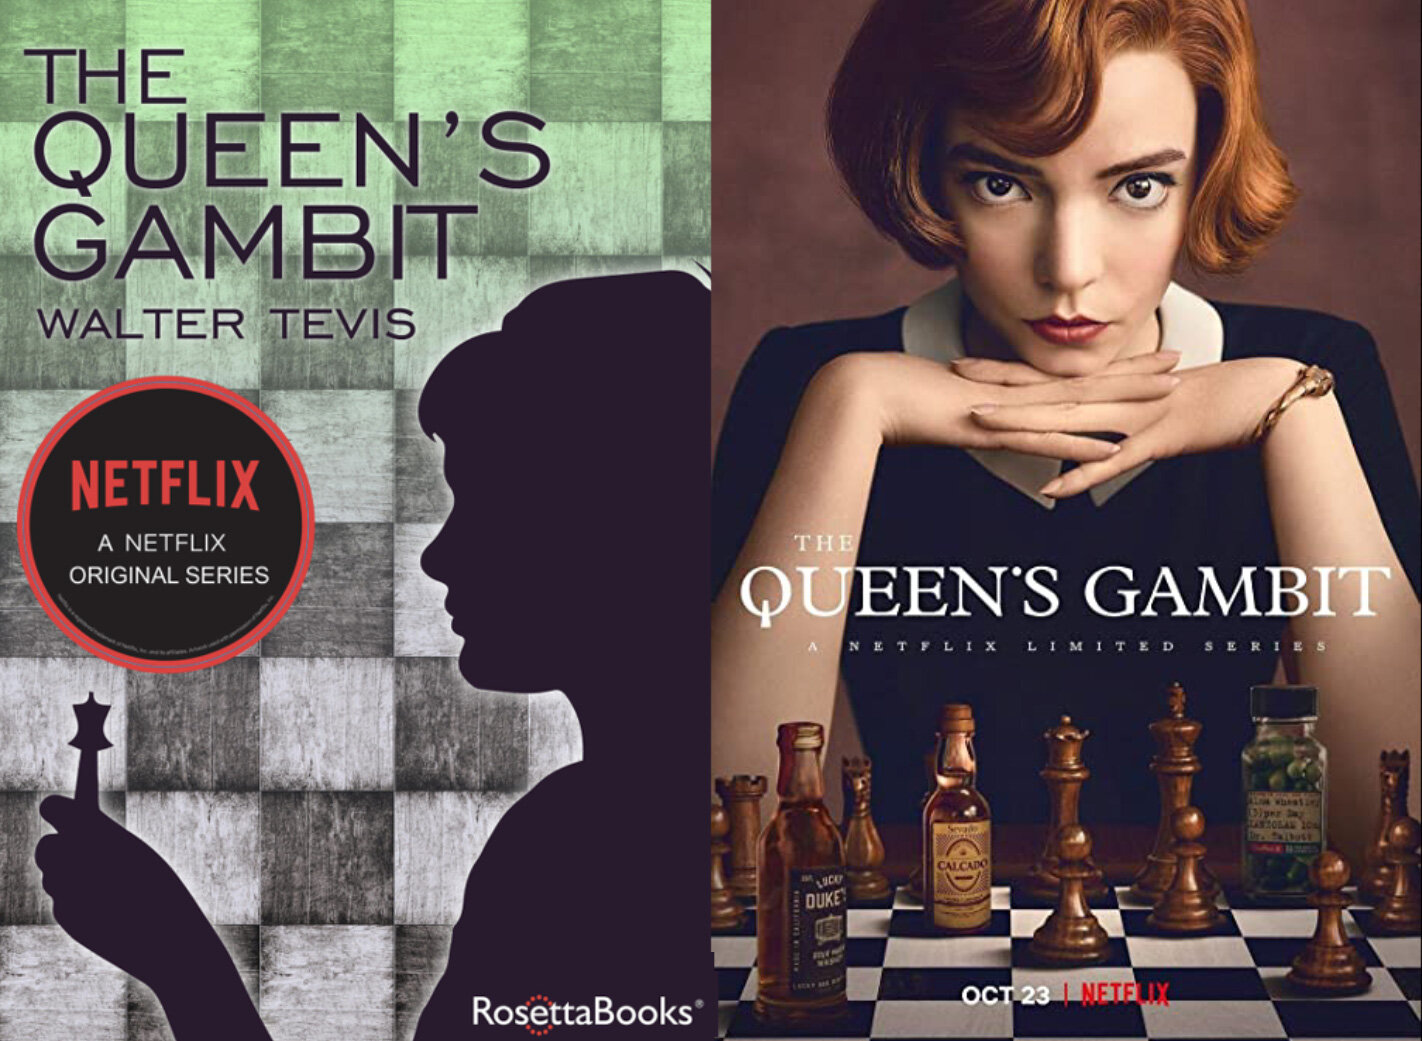 Queen's Gambit, Openings — Did They Write It Like That?